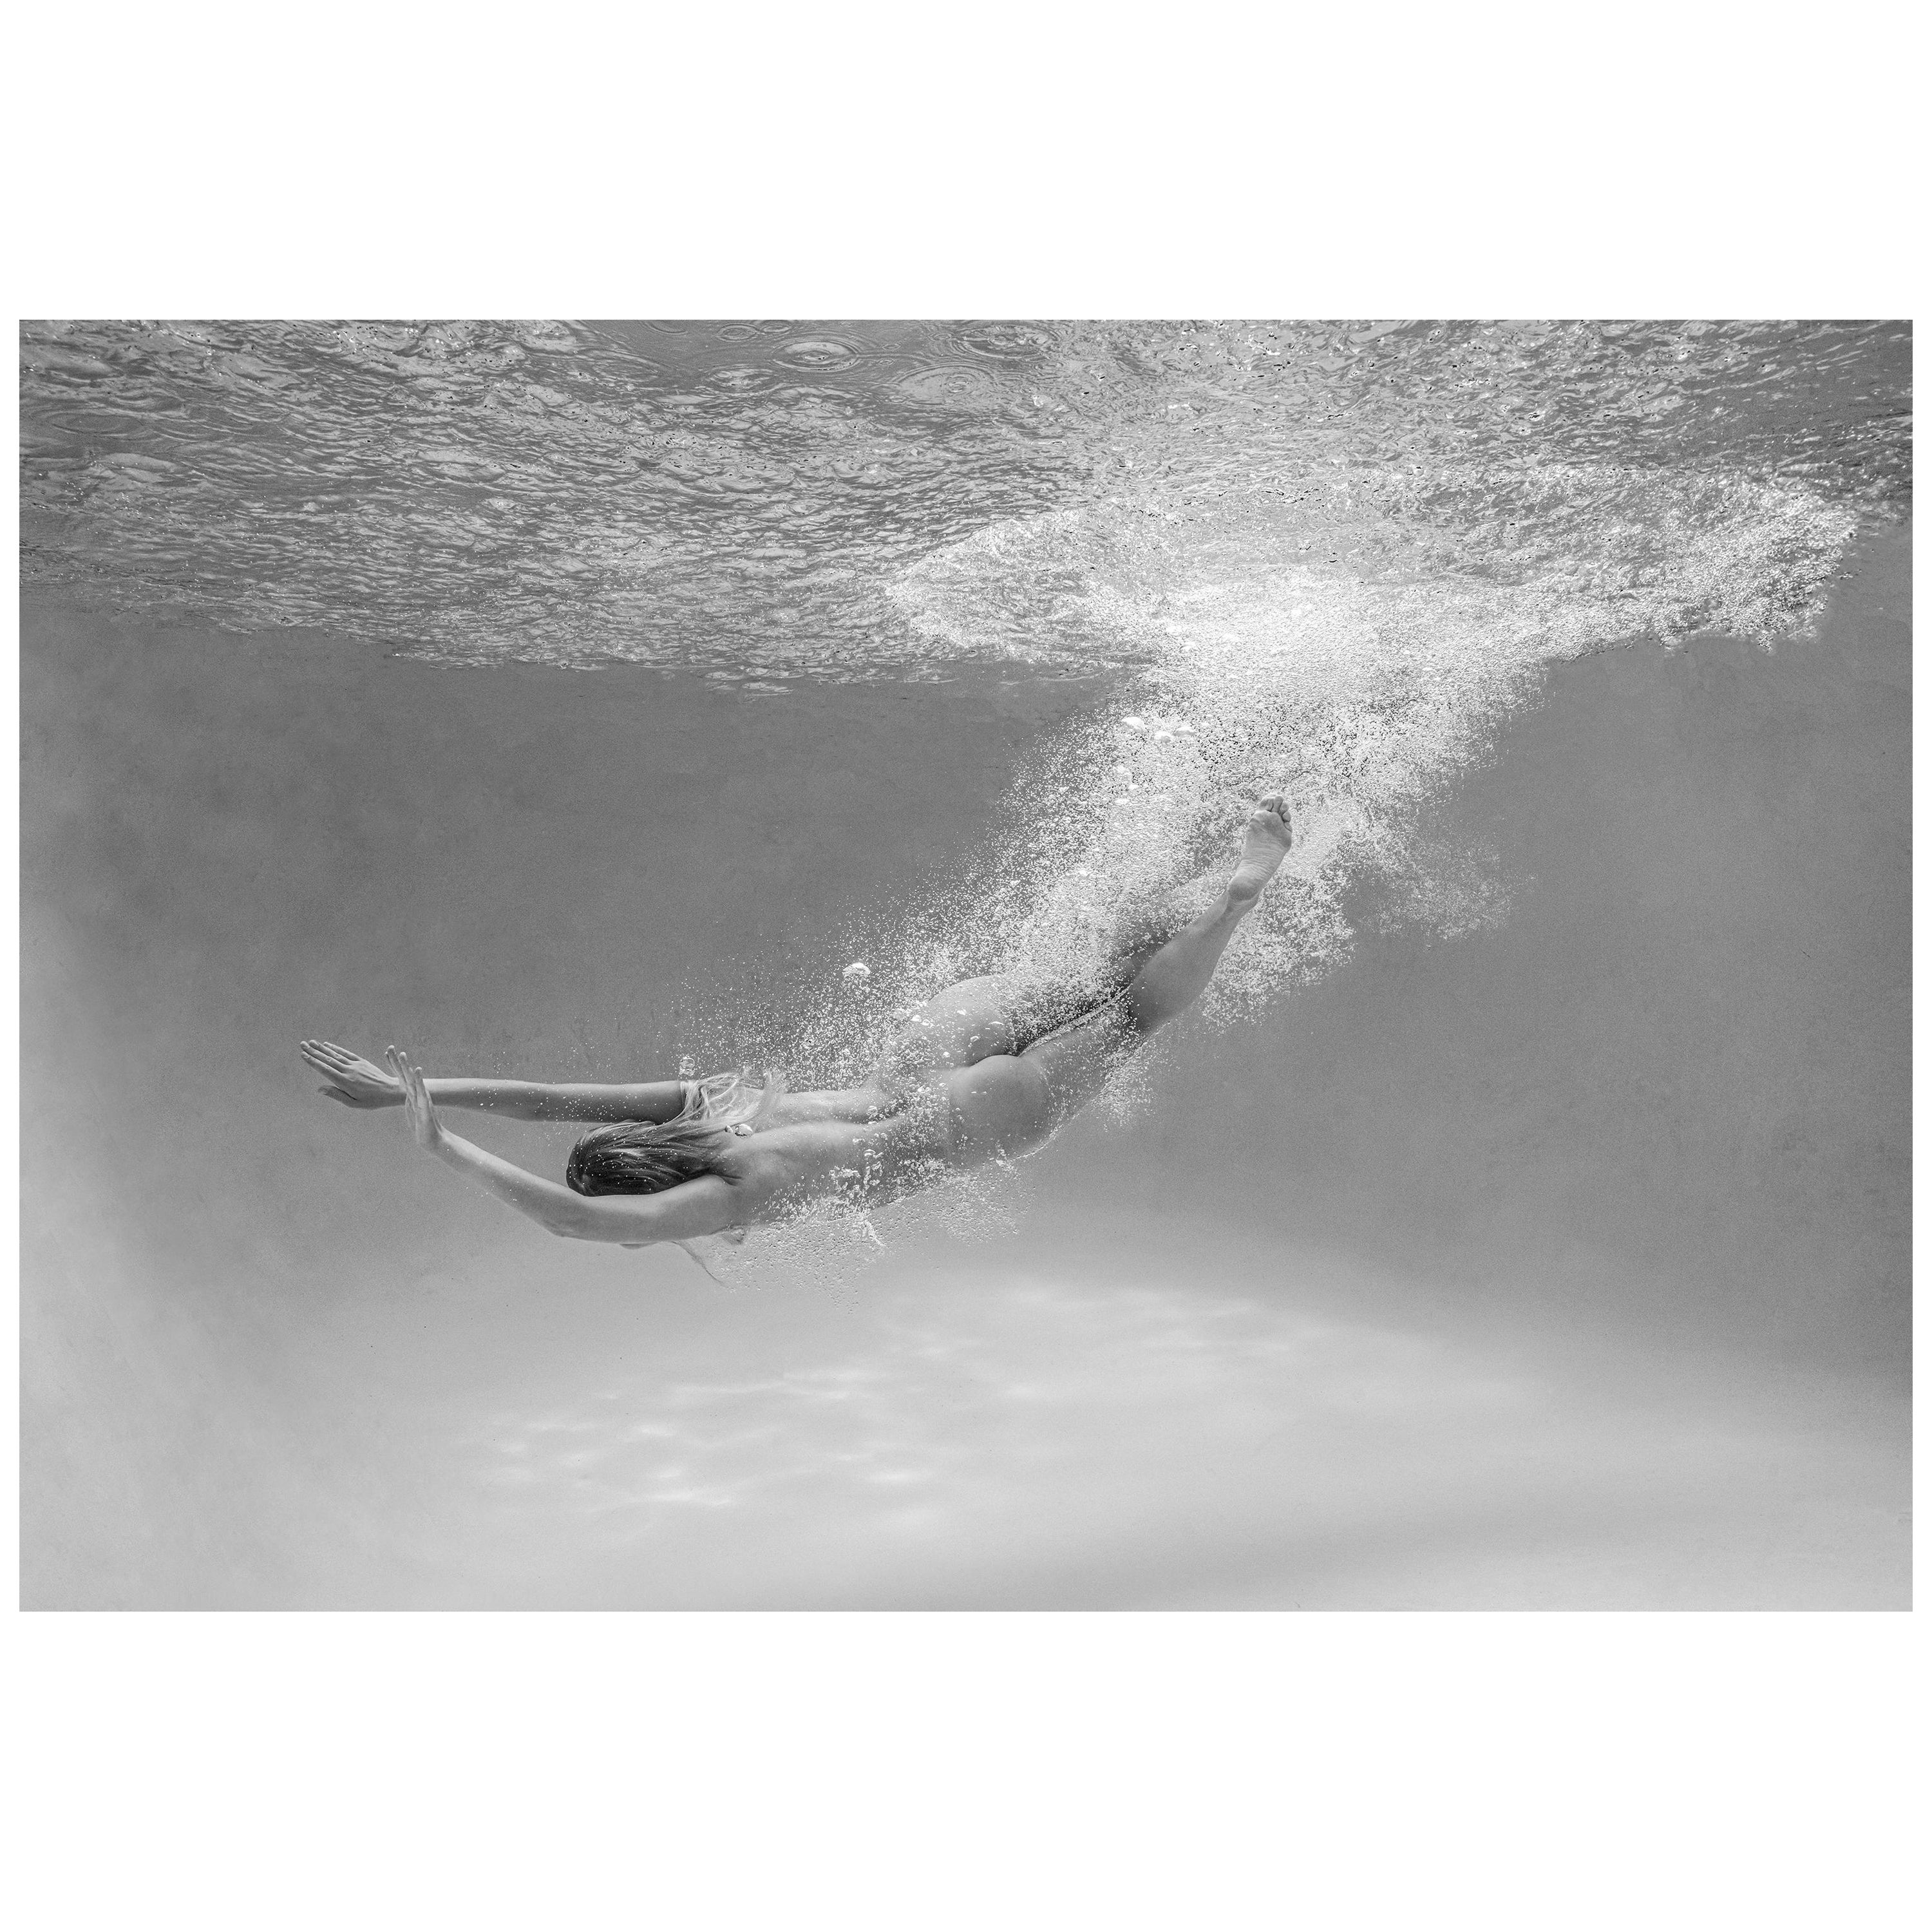 Alex Sher Black and White Photograph - Under - underwater black & white nude photograph - archival pigment print 43x63"